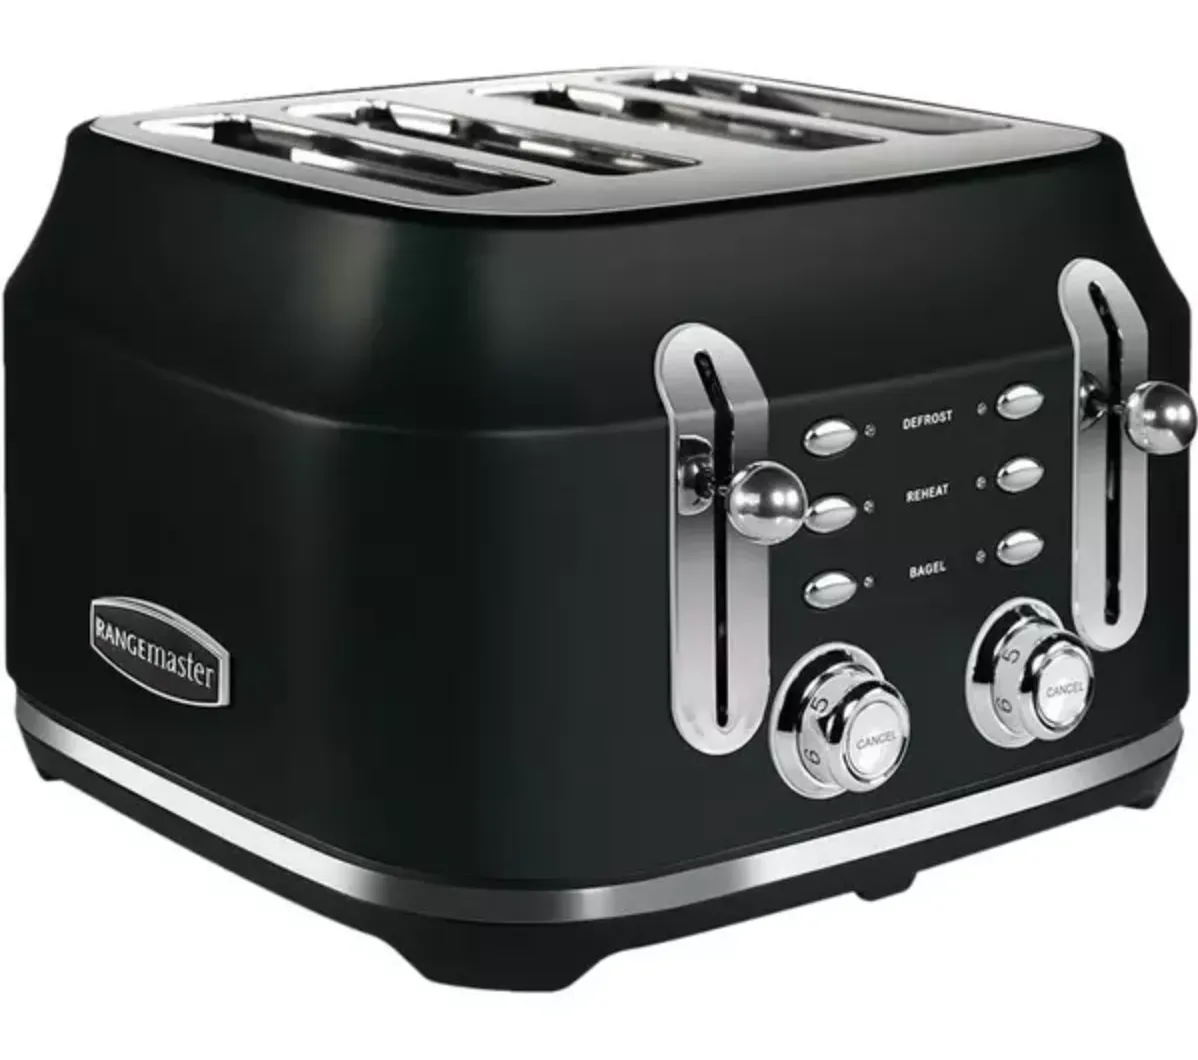 Rangemaster RMCL4S201BK 4-Slice Toaster - was £159 now £119 (save £40) 